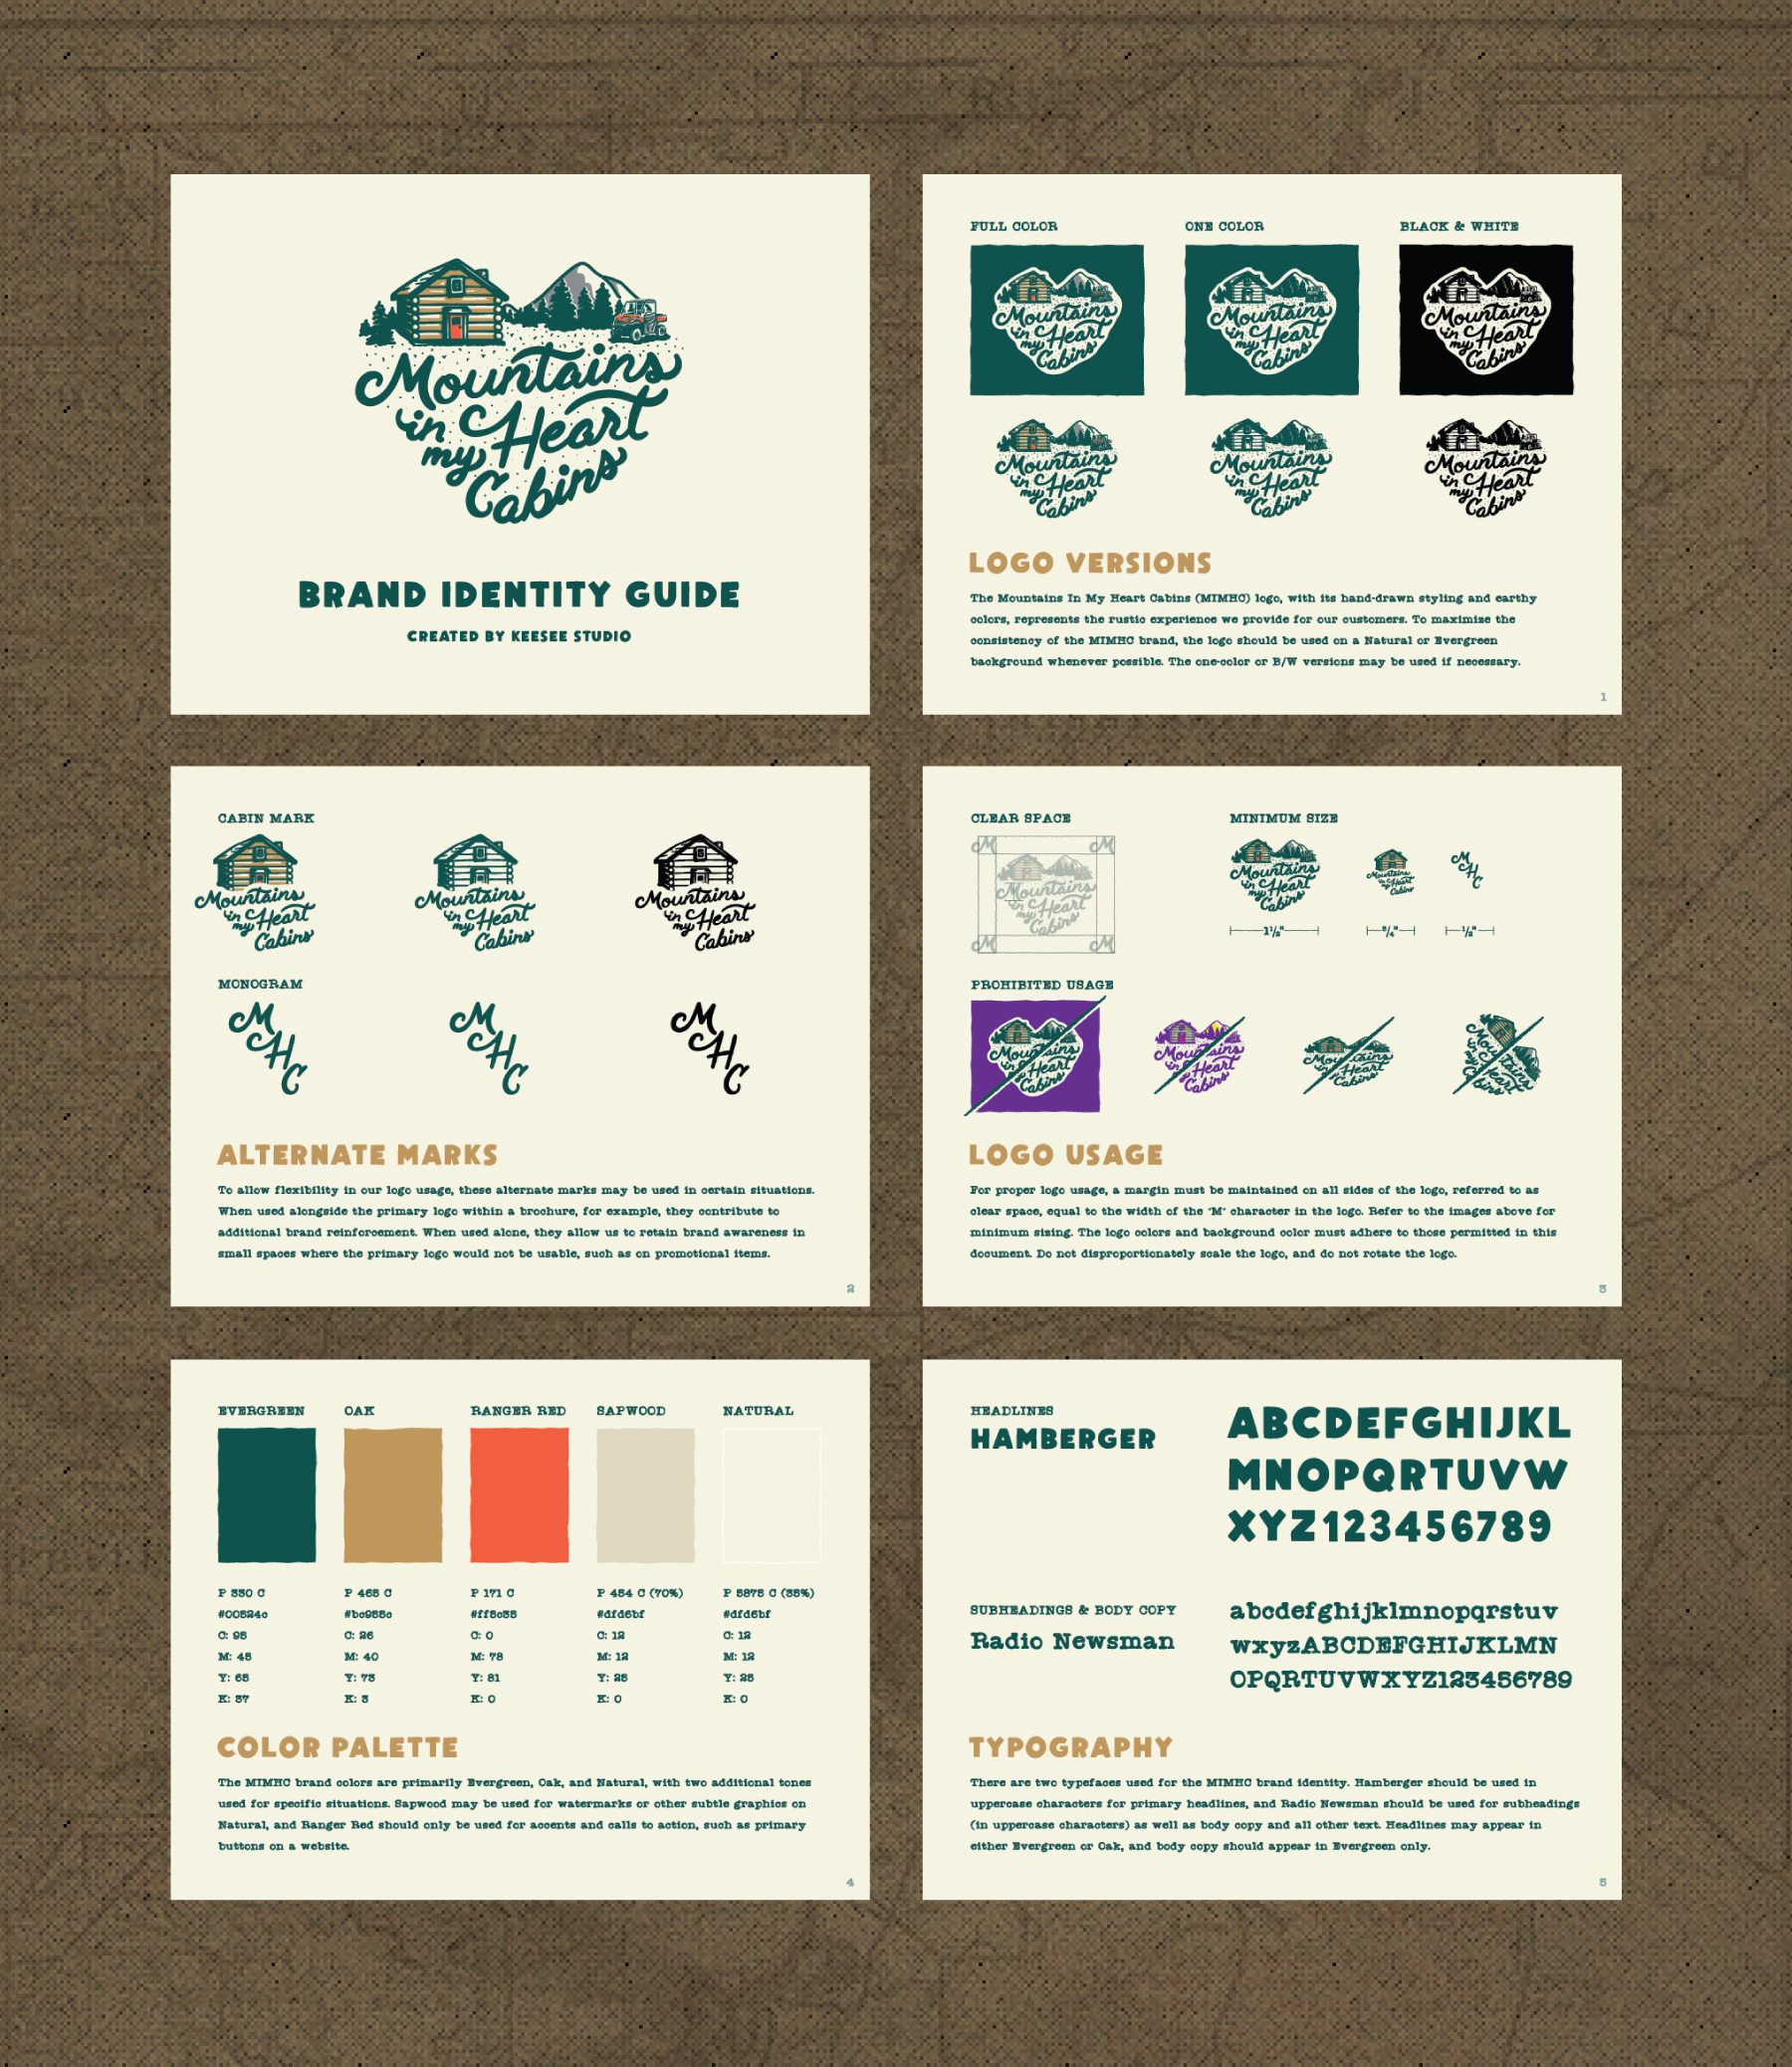 Mountains In My Heart Cabins brand identity guide